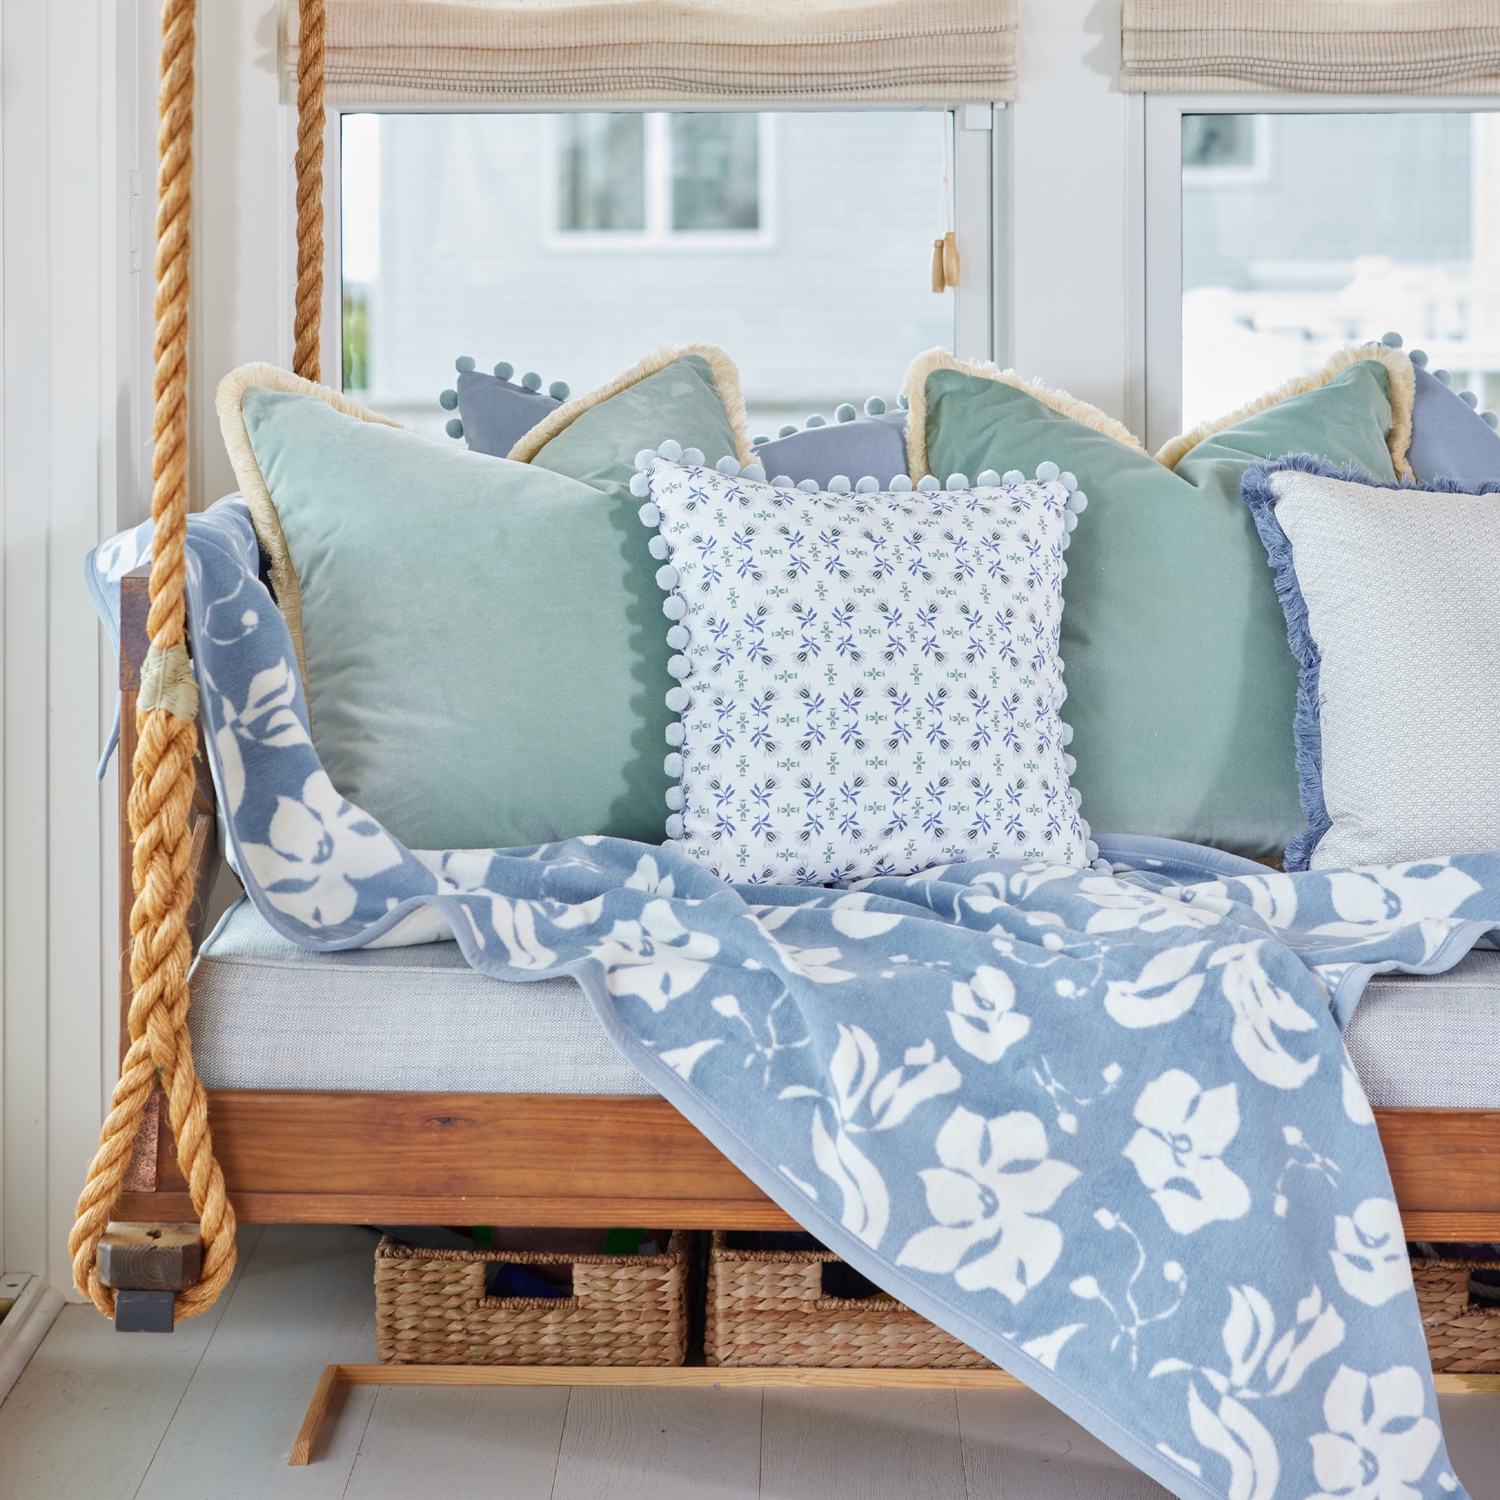 Bench with Mint Green and Sky Velvet Pillows, a Geometric Floral Pillow with Blue Pom Poms, and a Blue Floral Blanket.